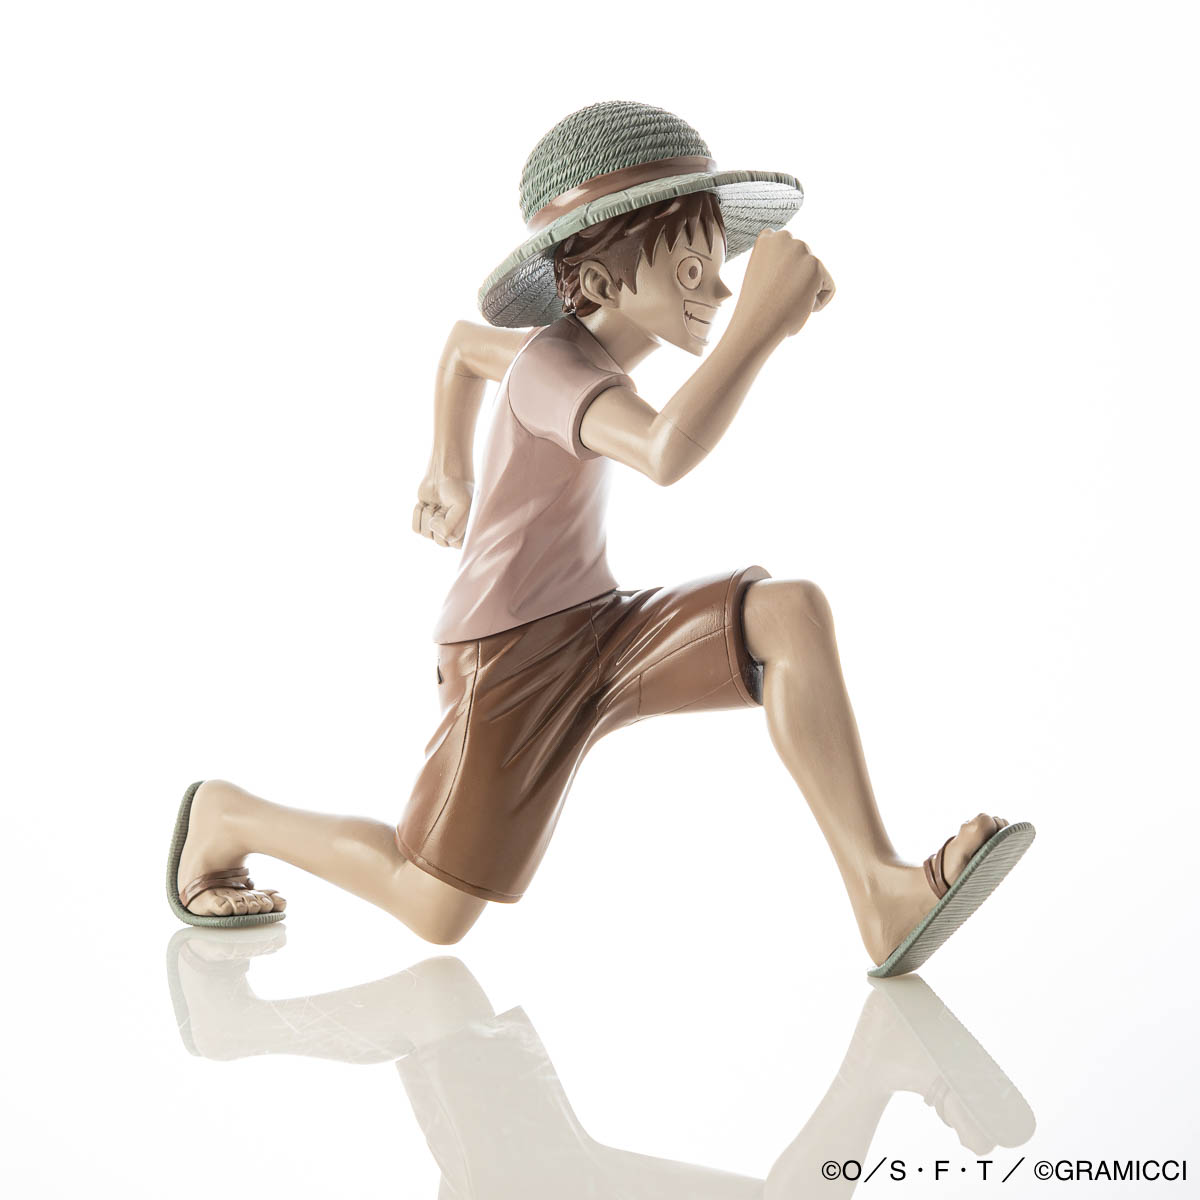 HKDSTOY GRAMICCI x ONE PIECE [Luffy ‘Running man’] Sepia